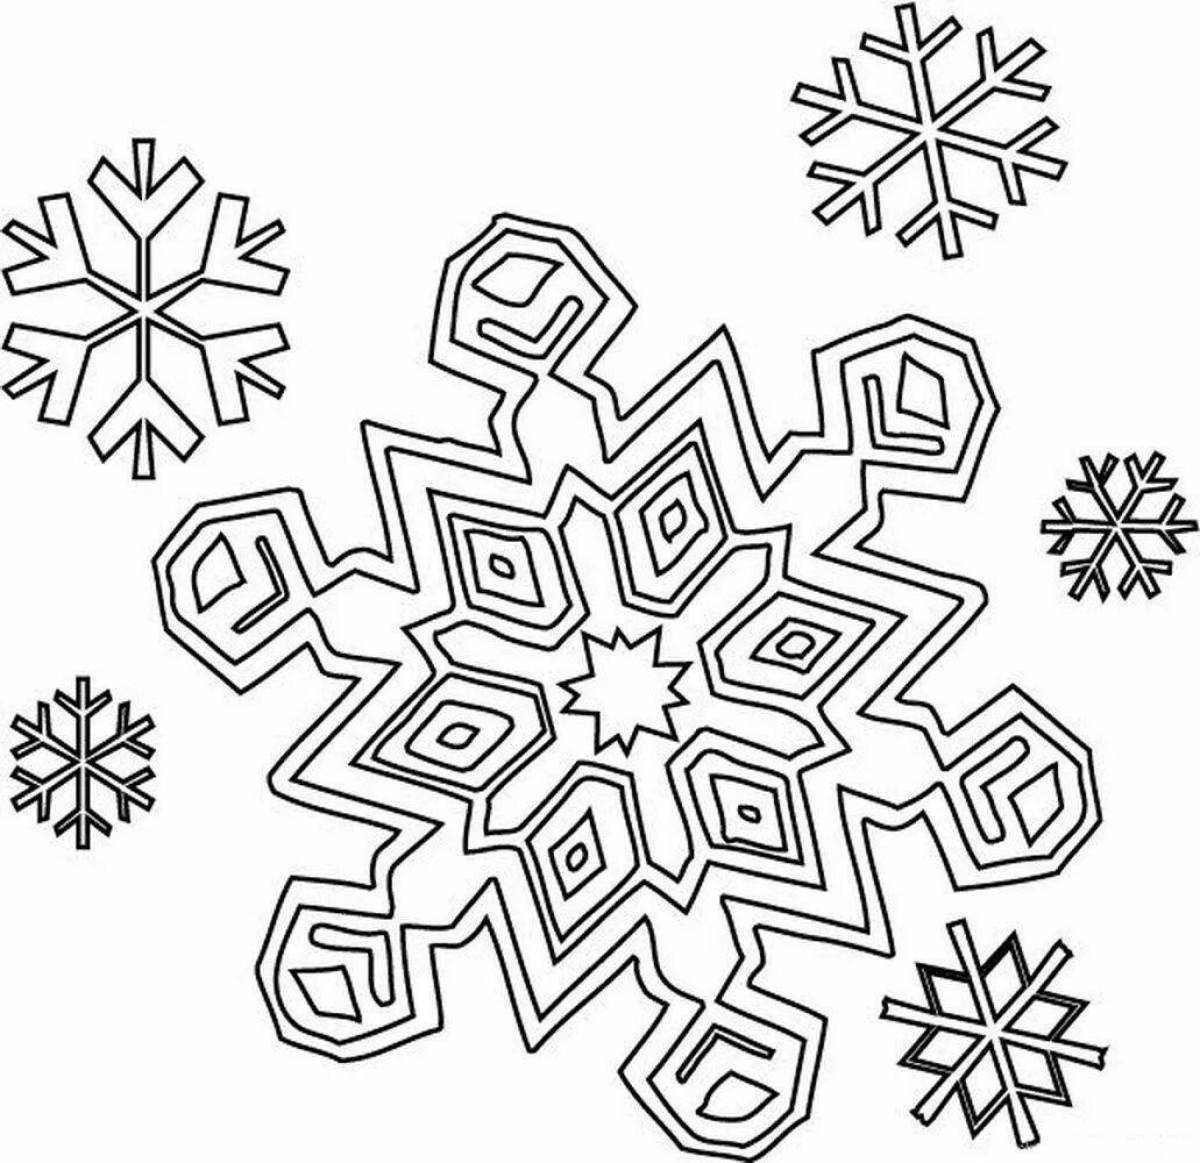 Spicy snowflake coloring book for kids 3-4 years old